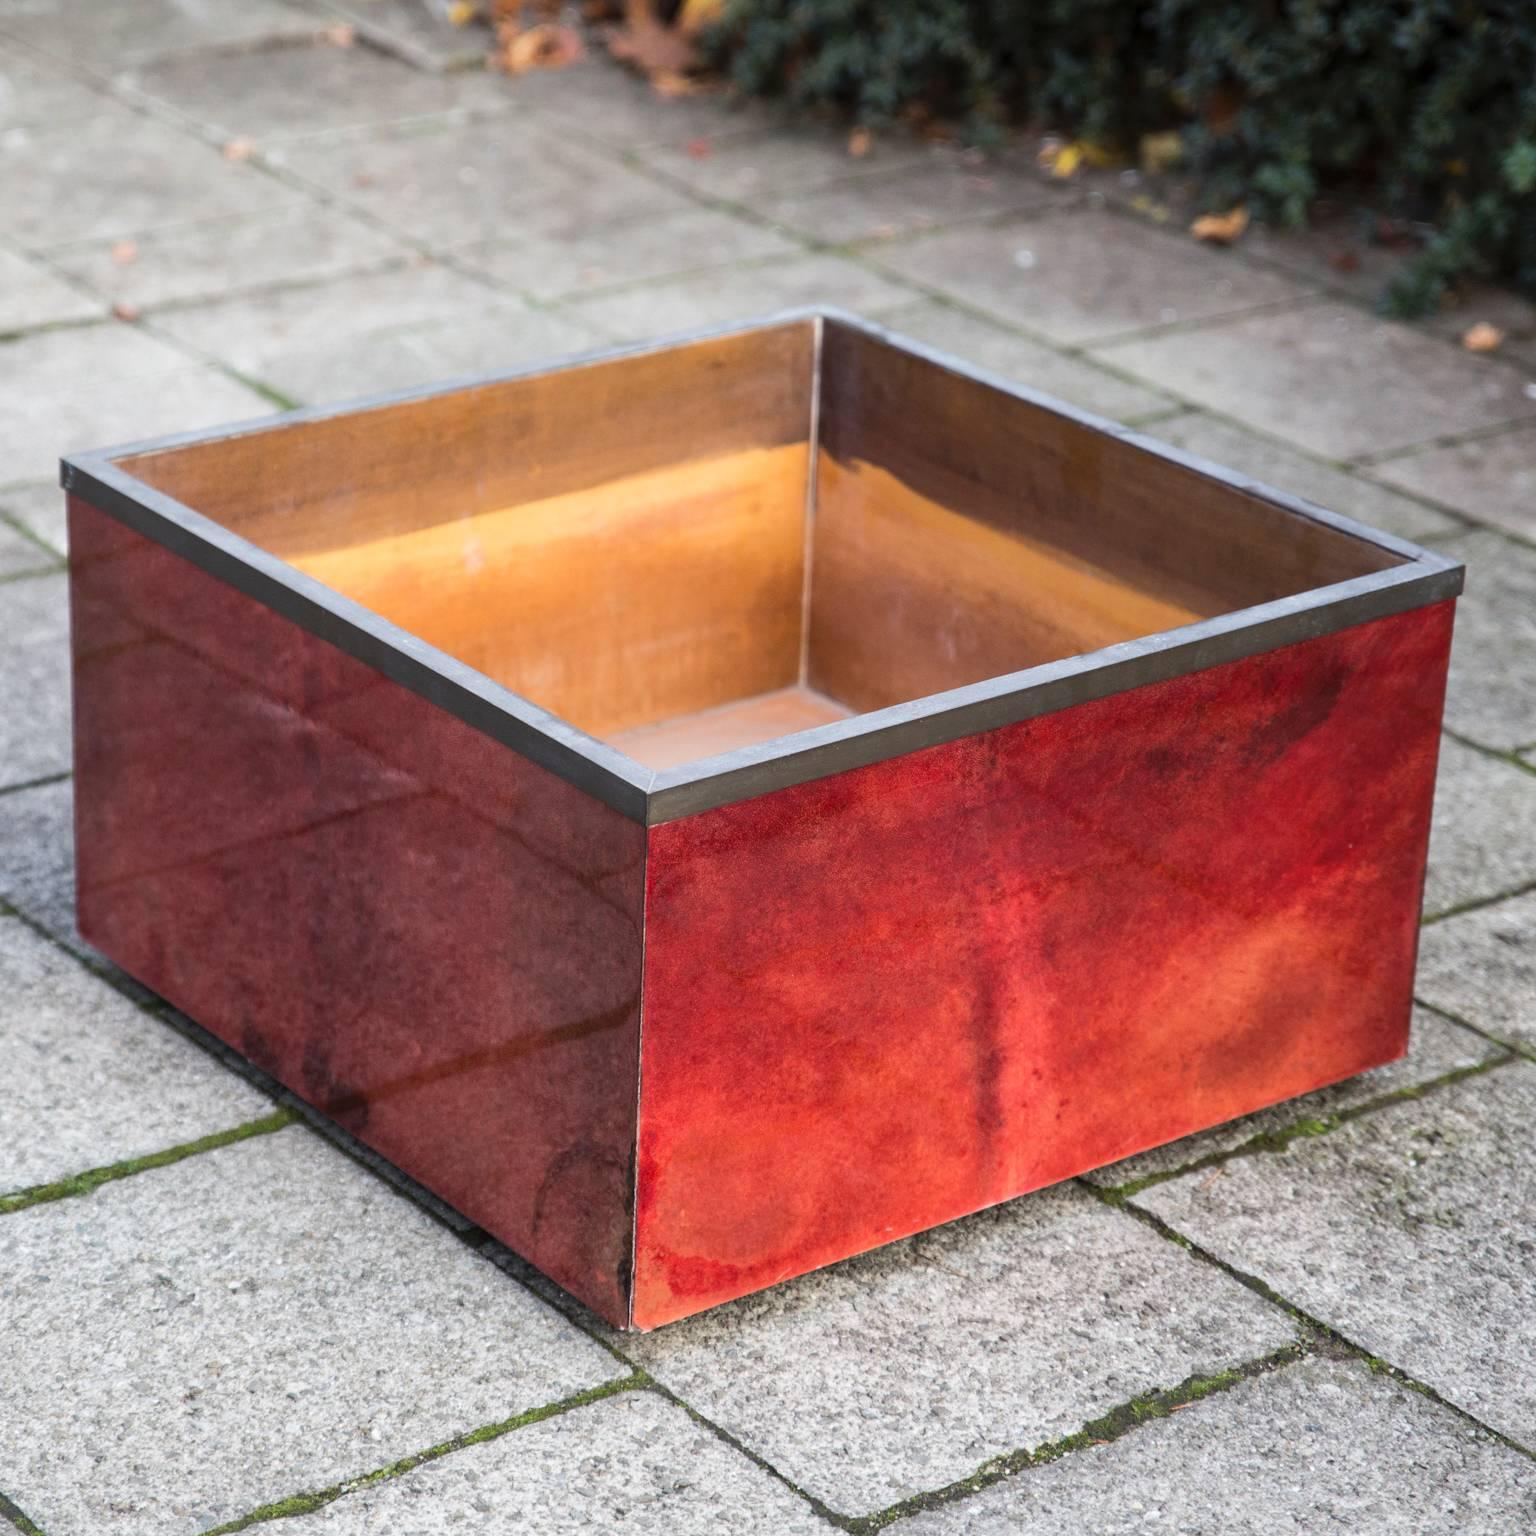 Elegant red squared goatskin planter with a brass border and four wheels by Aldo Tura, 1968.